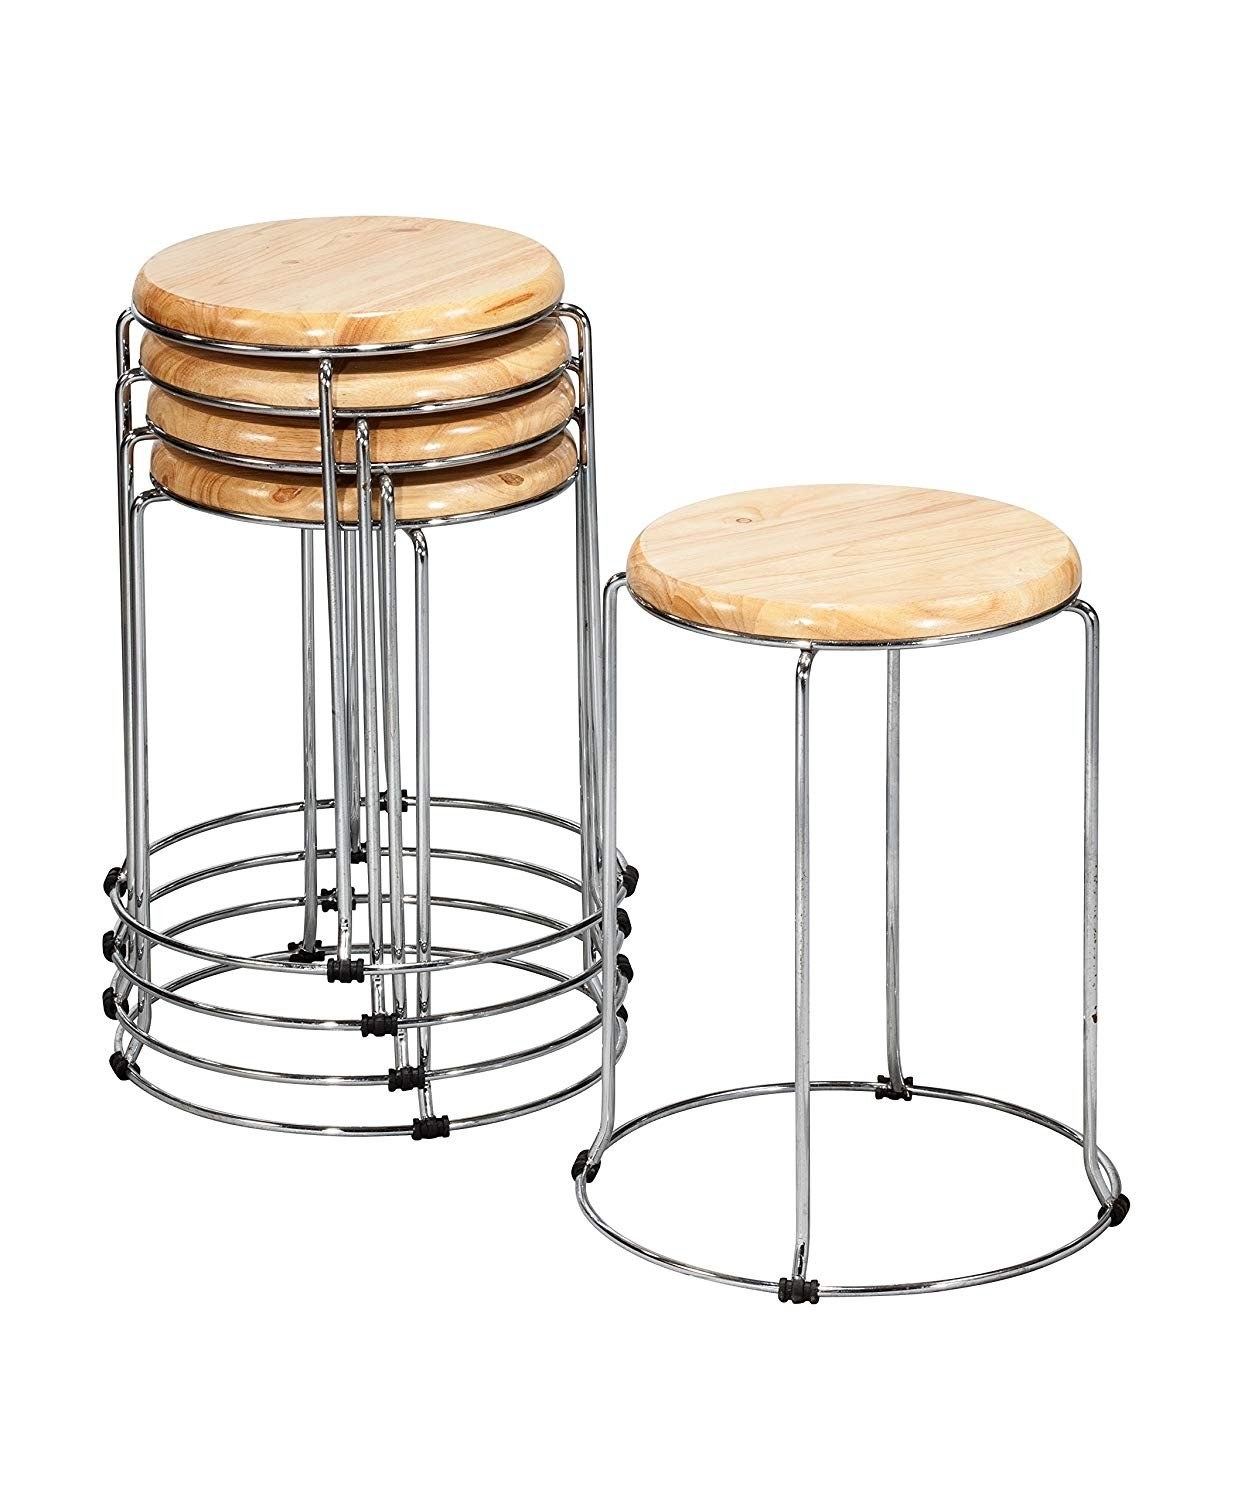 Nested stools with wooden tops